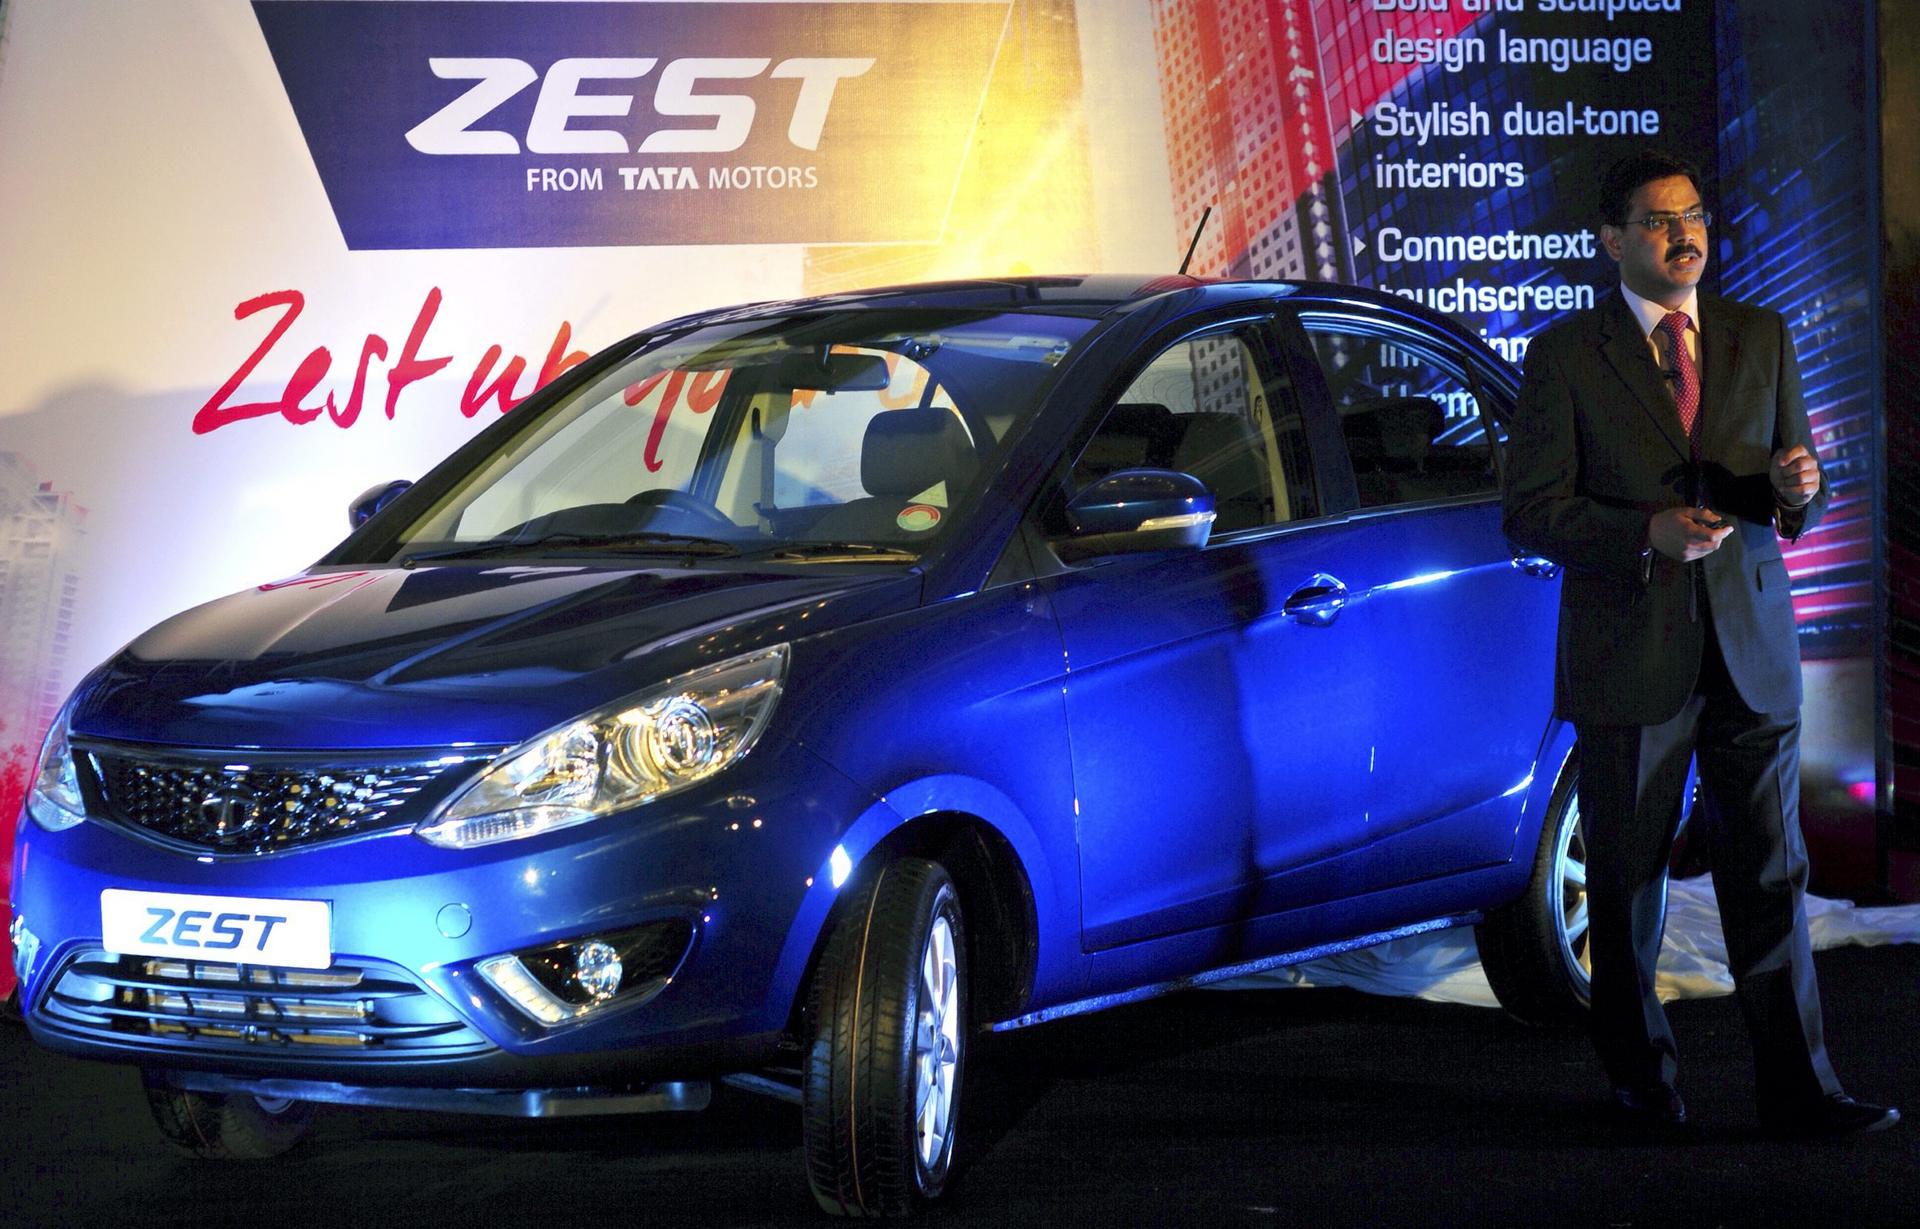 Tata Motors' vice-president Girish Wagh at last week's launch of the Zest. The compact model carries the carmaker's hopes of reviving a sluggish domestic market. Photo: EPA